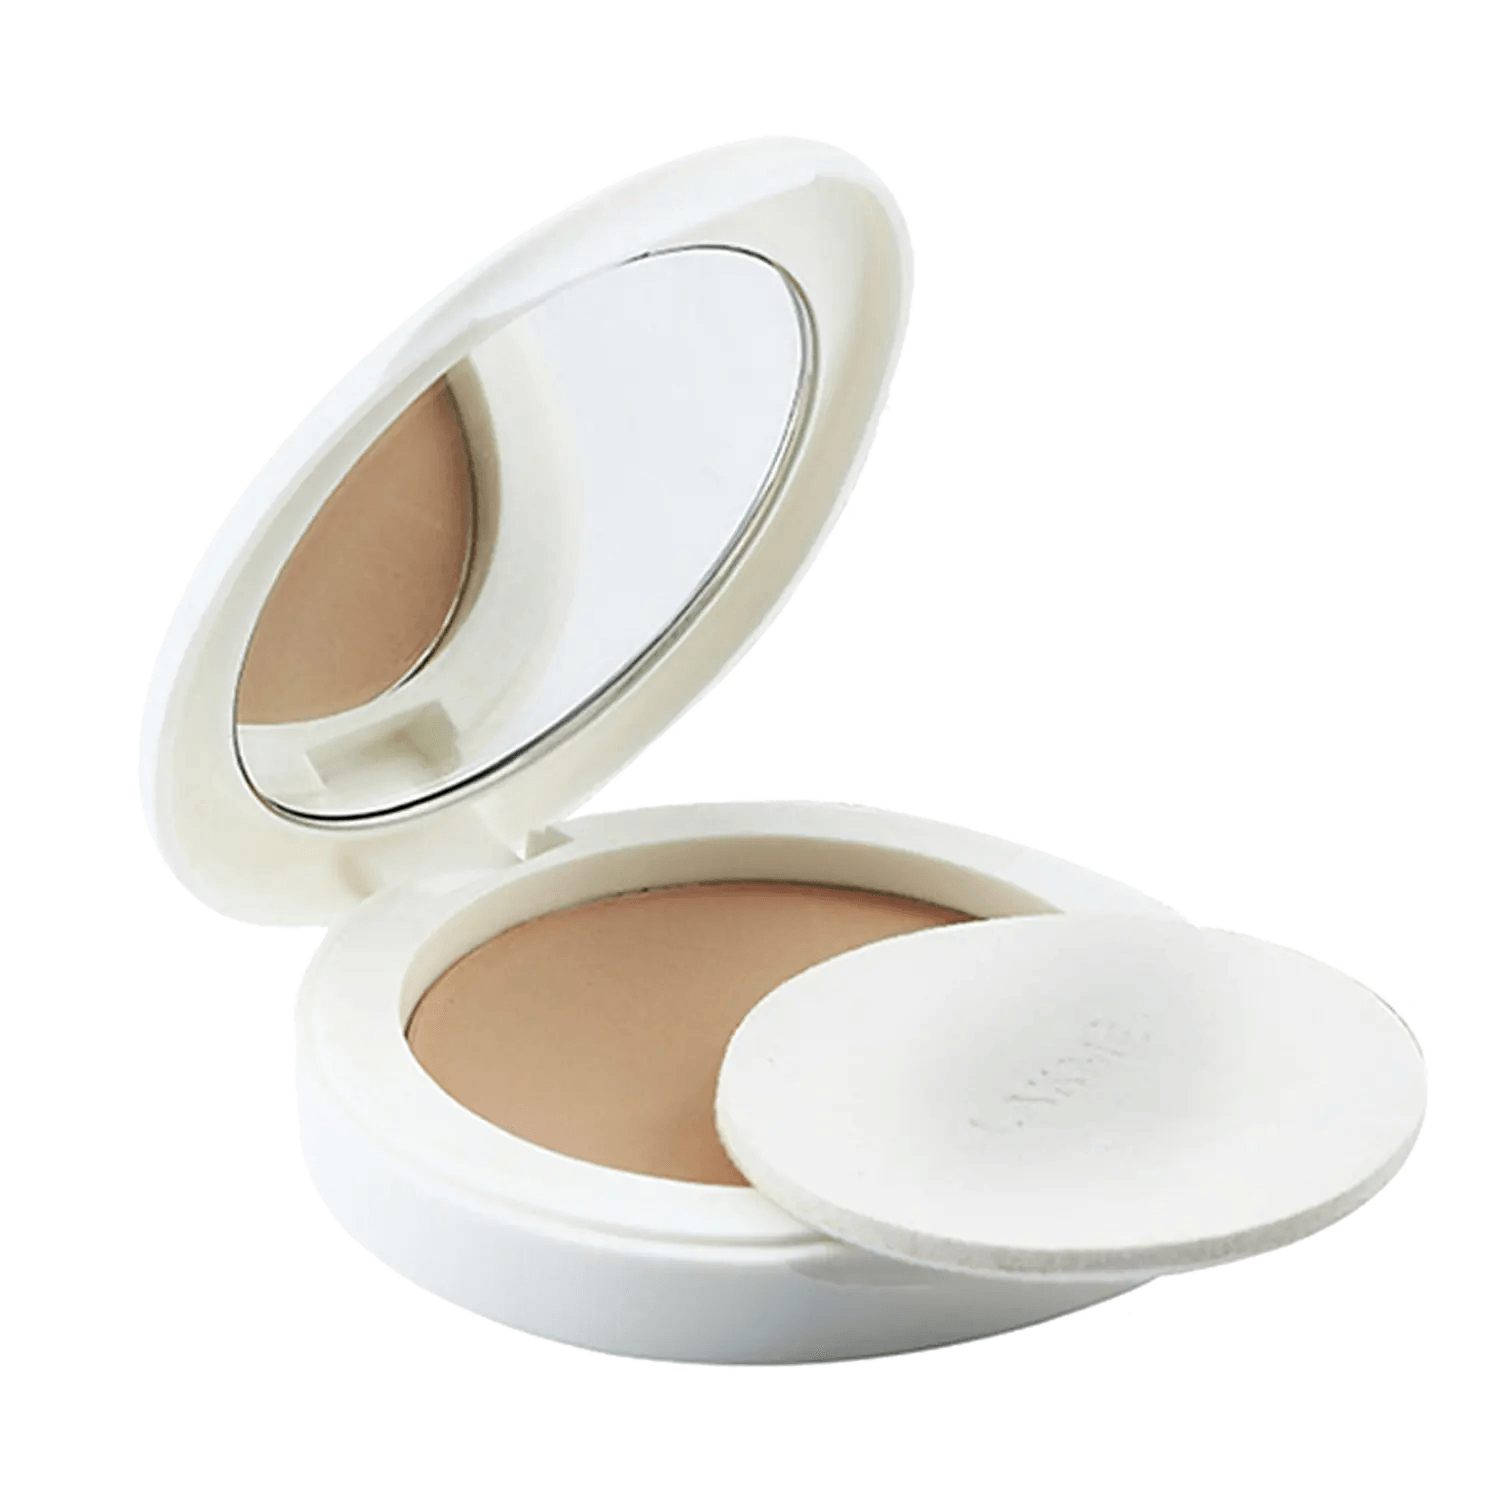 Lakme | Lakme Perfect Radiance Compact - Golden Sand 03 (8g)